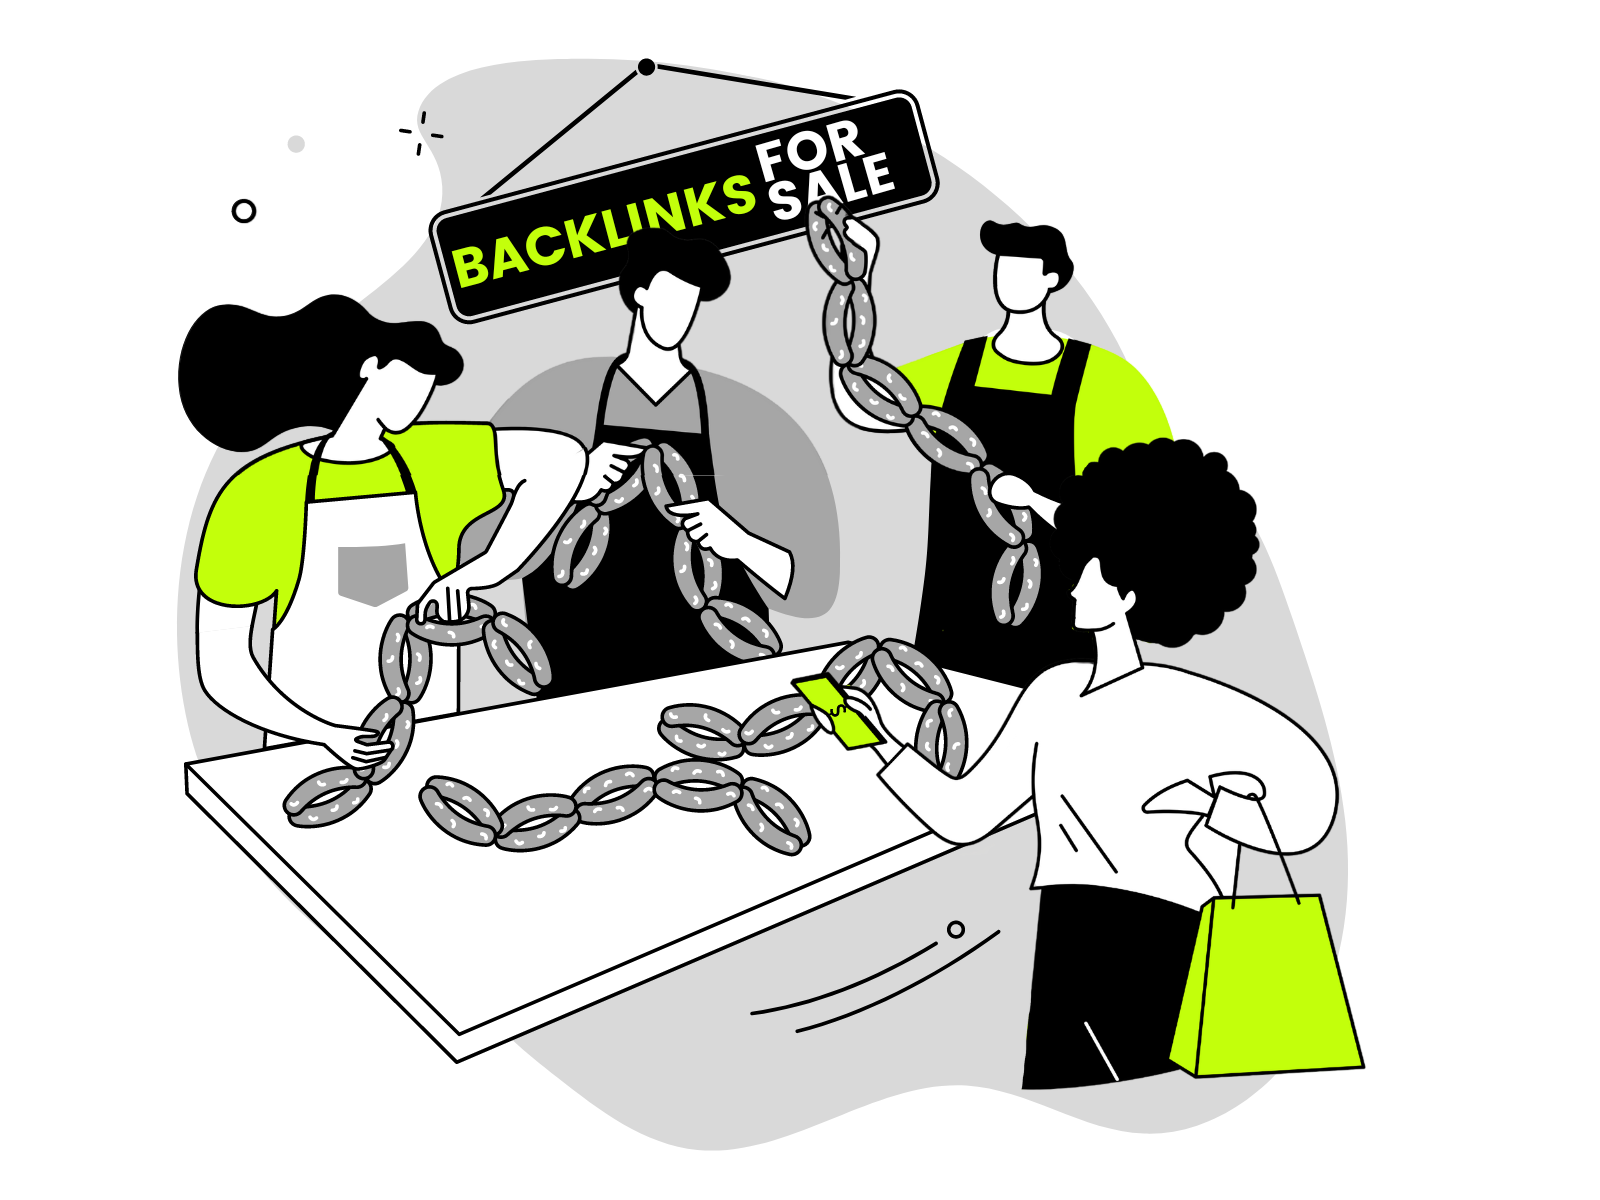 Should You Buy Backlinks? Yes, But Only If You Do It This Way